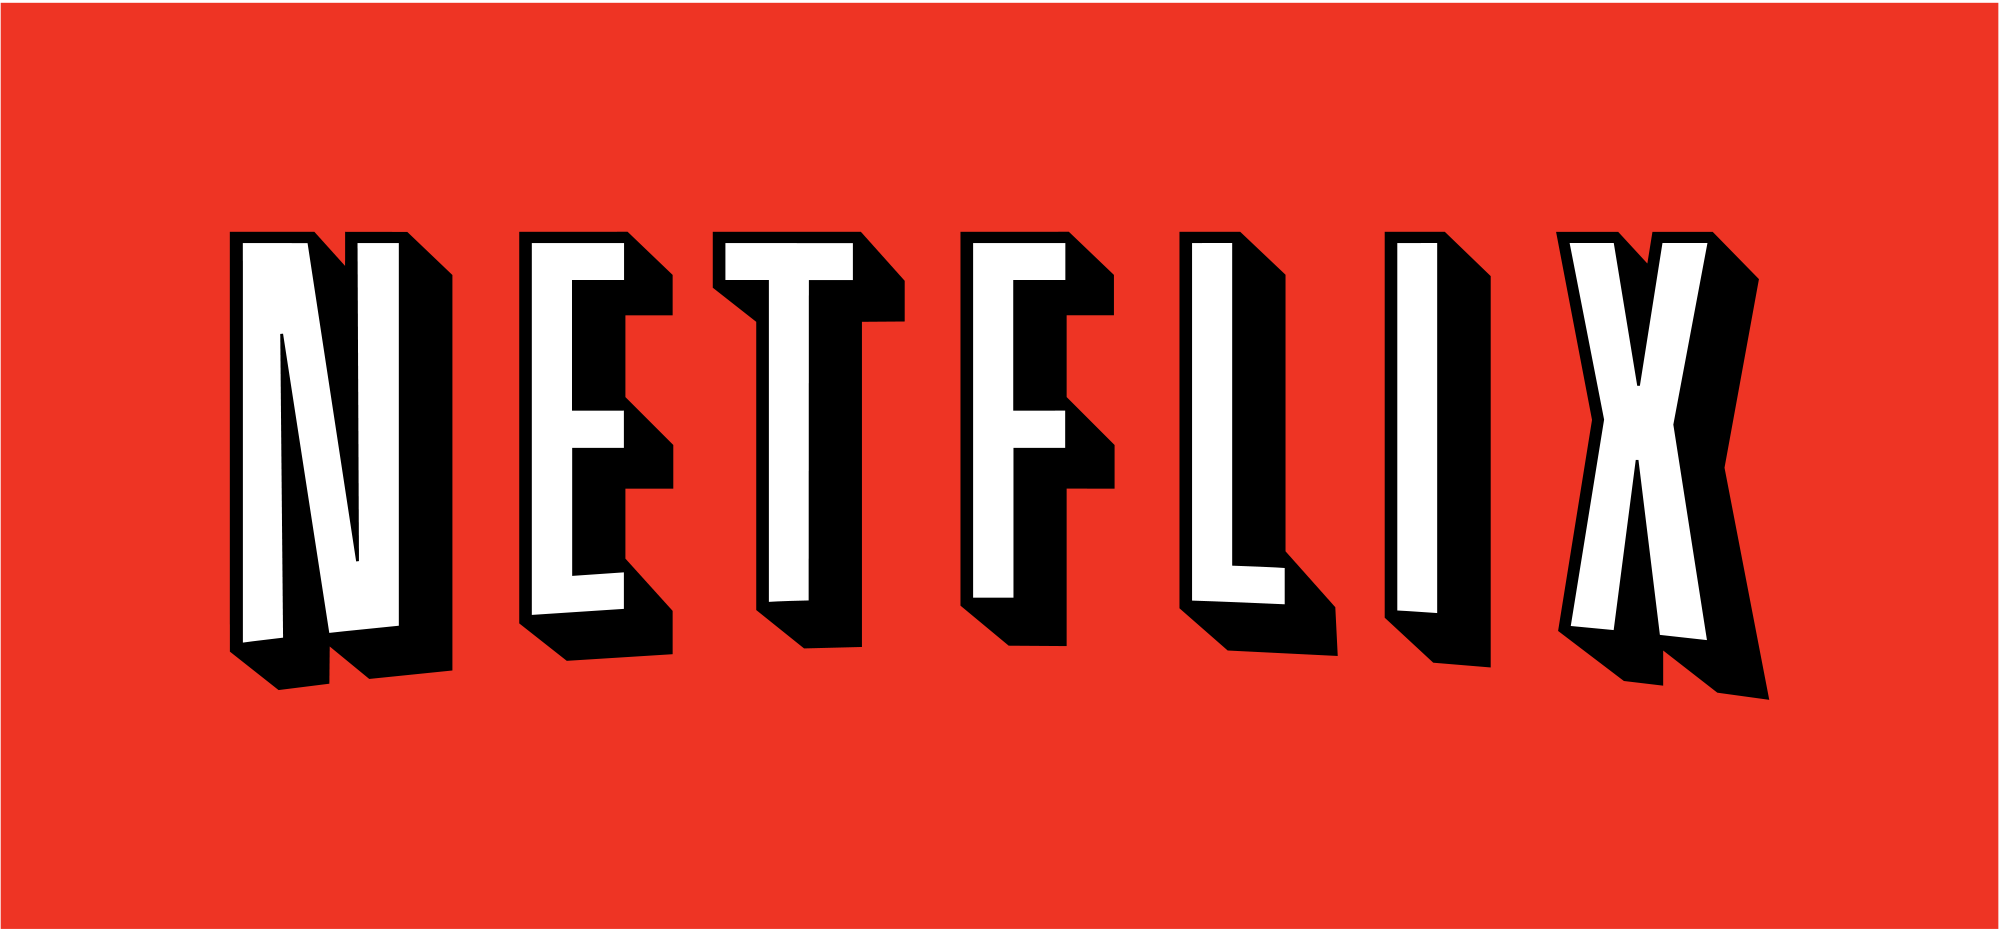 Cable Companies Lose Big As Netflix Sees Huge Subscriber Gains In Q2 2015